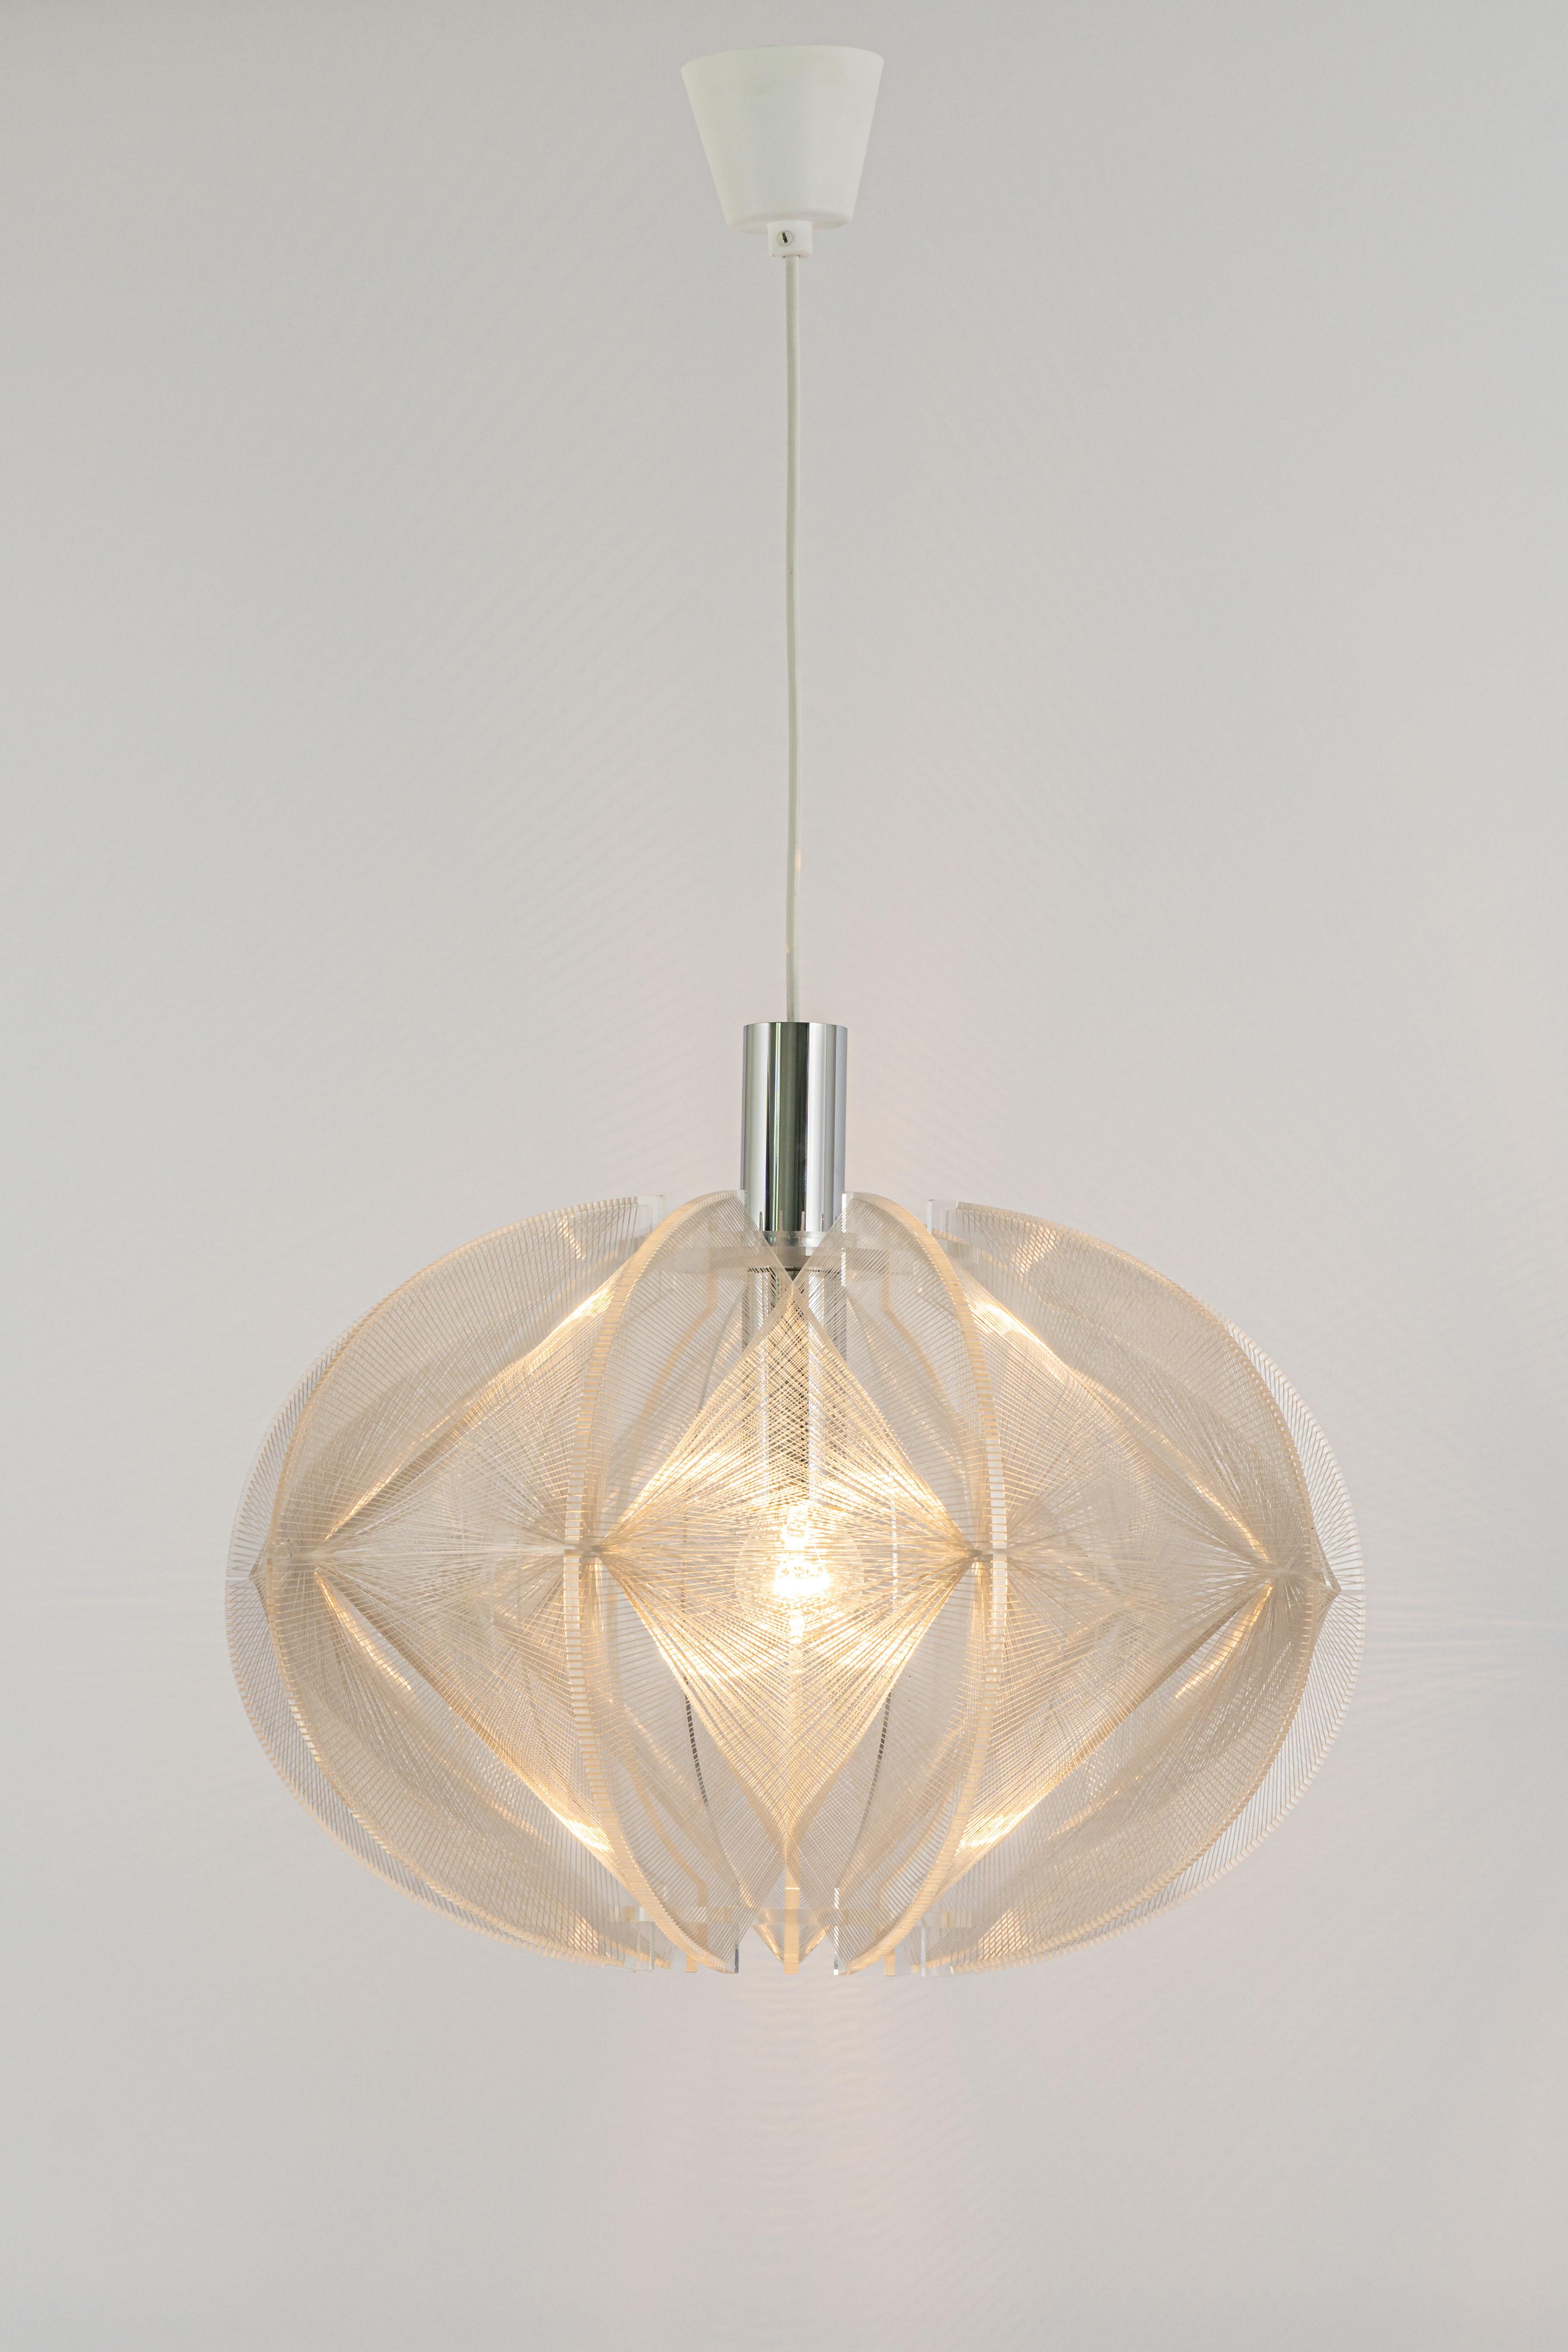 Paul Secon for Sompex-Clear Wire Pendant Lamp, Germany, 1970s For Sale 6